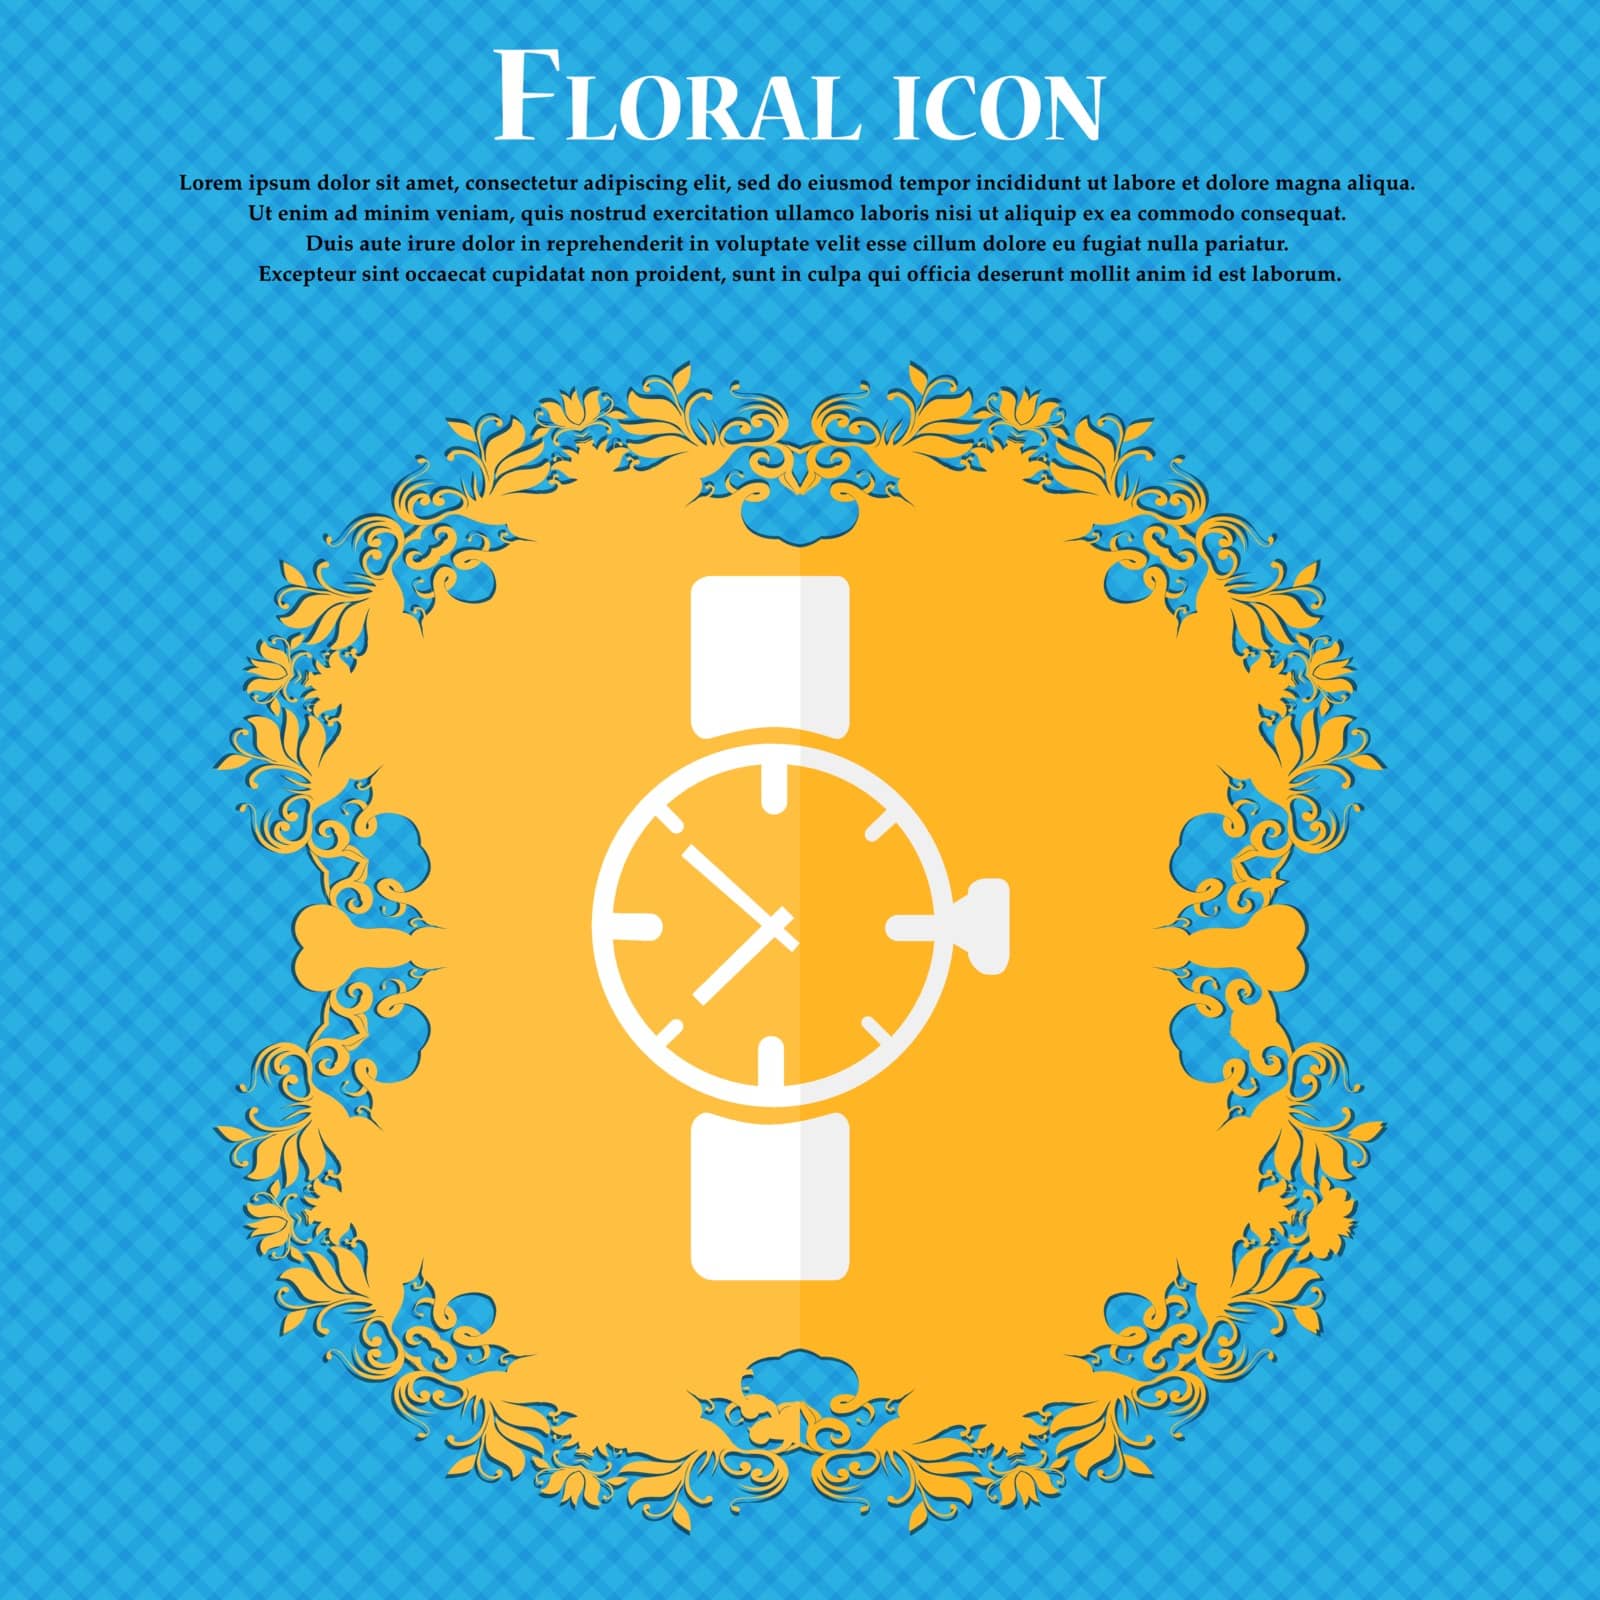 watches icon symbol . Floral flat design on a blue abstract background with place for your text. Vector illustration